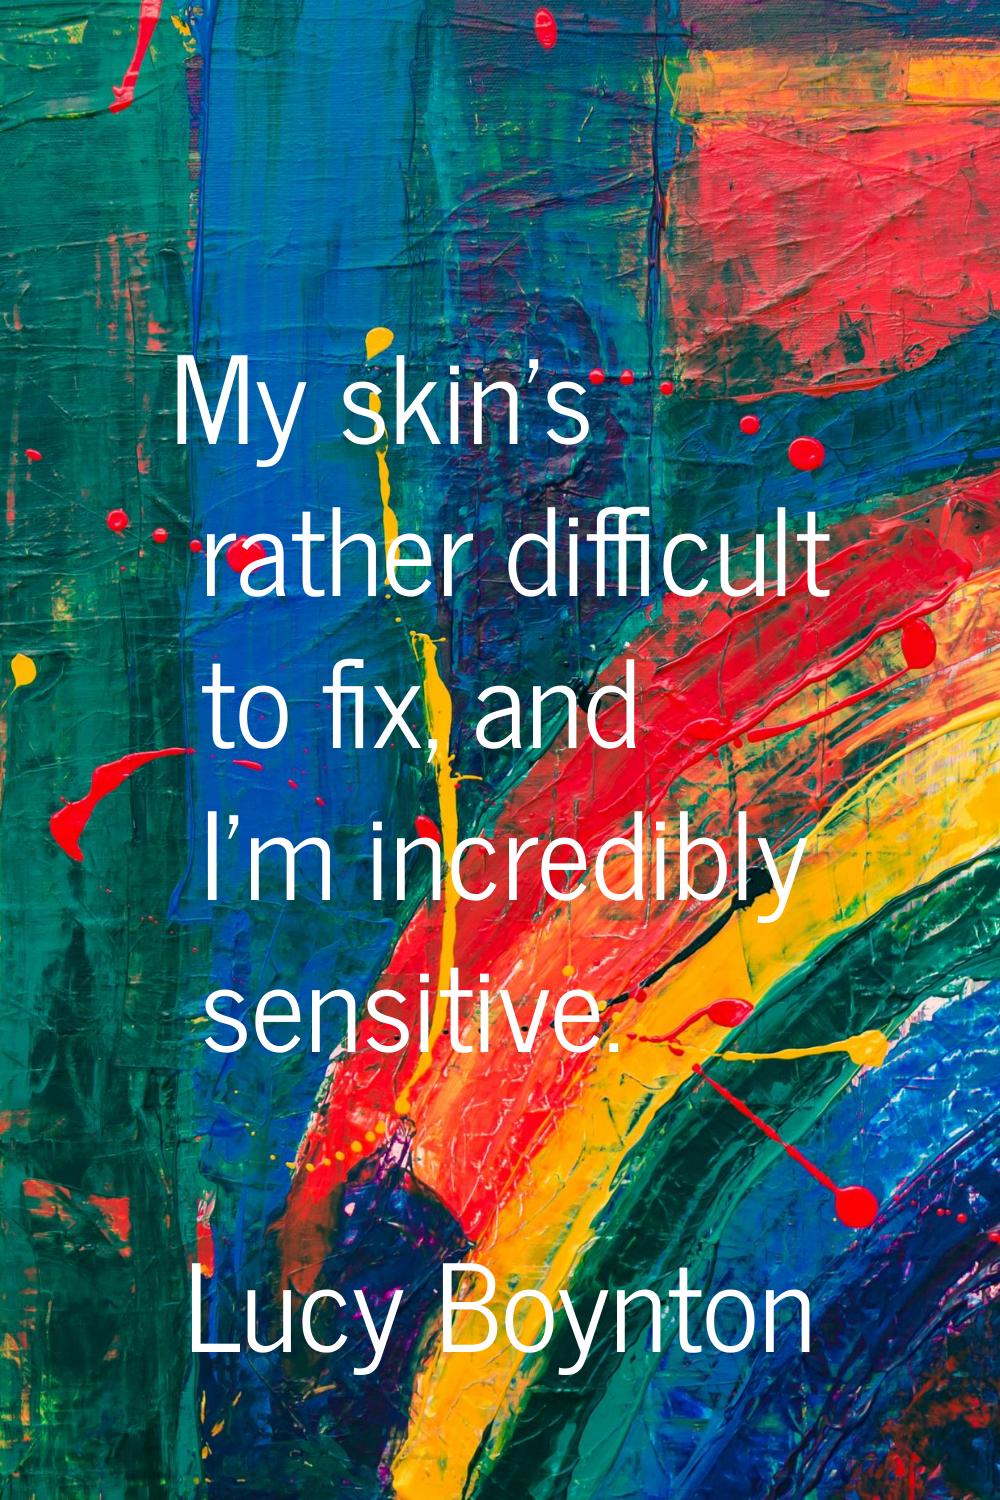 My skin's rather difficult to fix, and I'm incredibly sensitive.